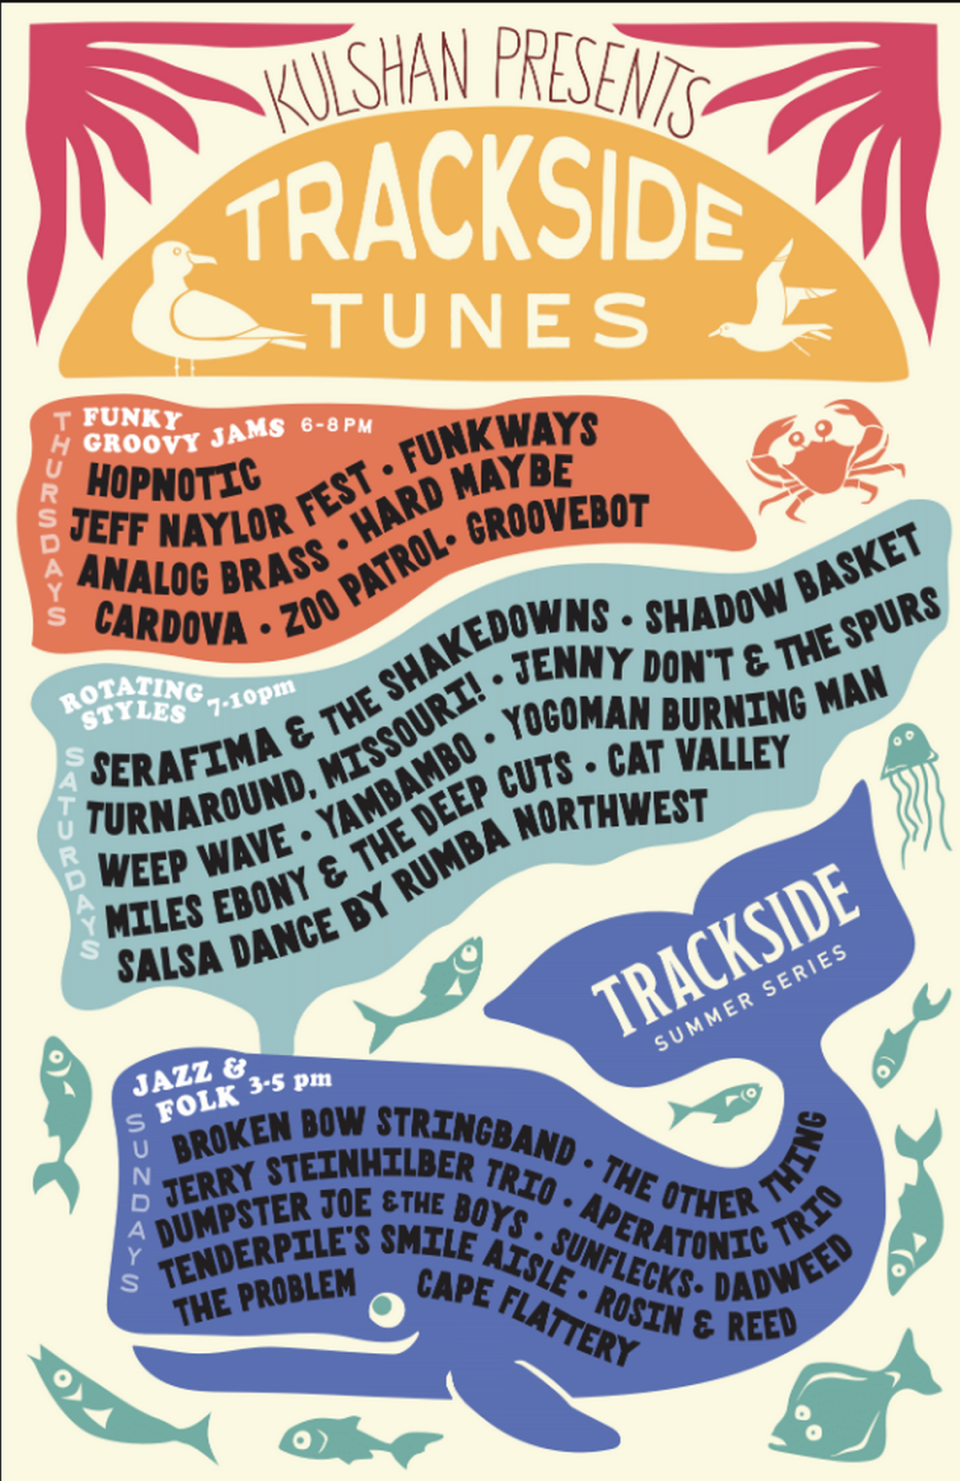 Kulshan Brewing Co’s Trackside Tunes Summer Music festival line up and scheduel